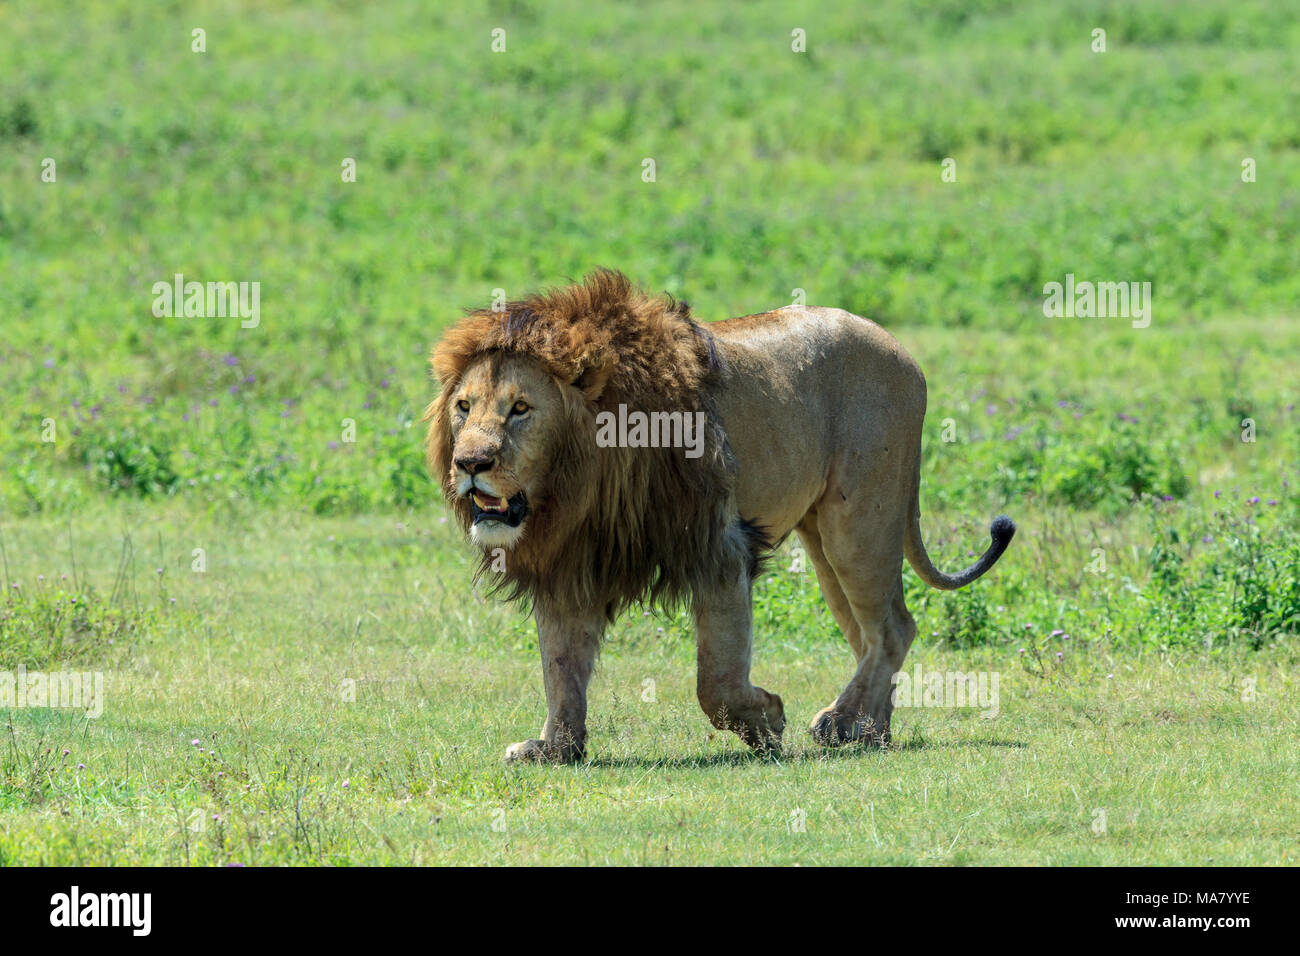 The East African lion is a lion population located primarily in East Africa. In this part of Africa, lions occur in East Africa. Stock Photo